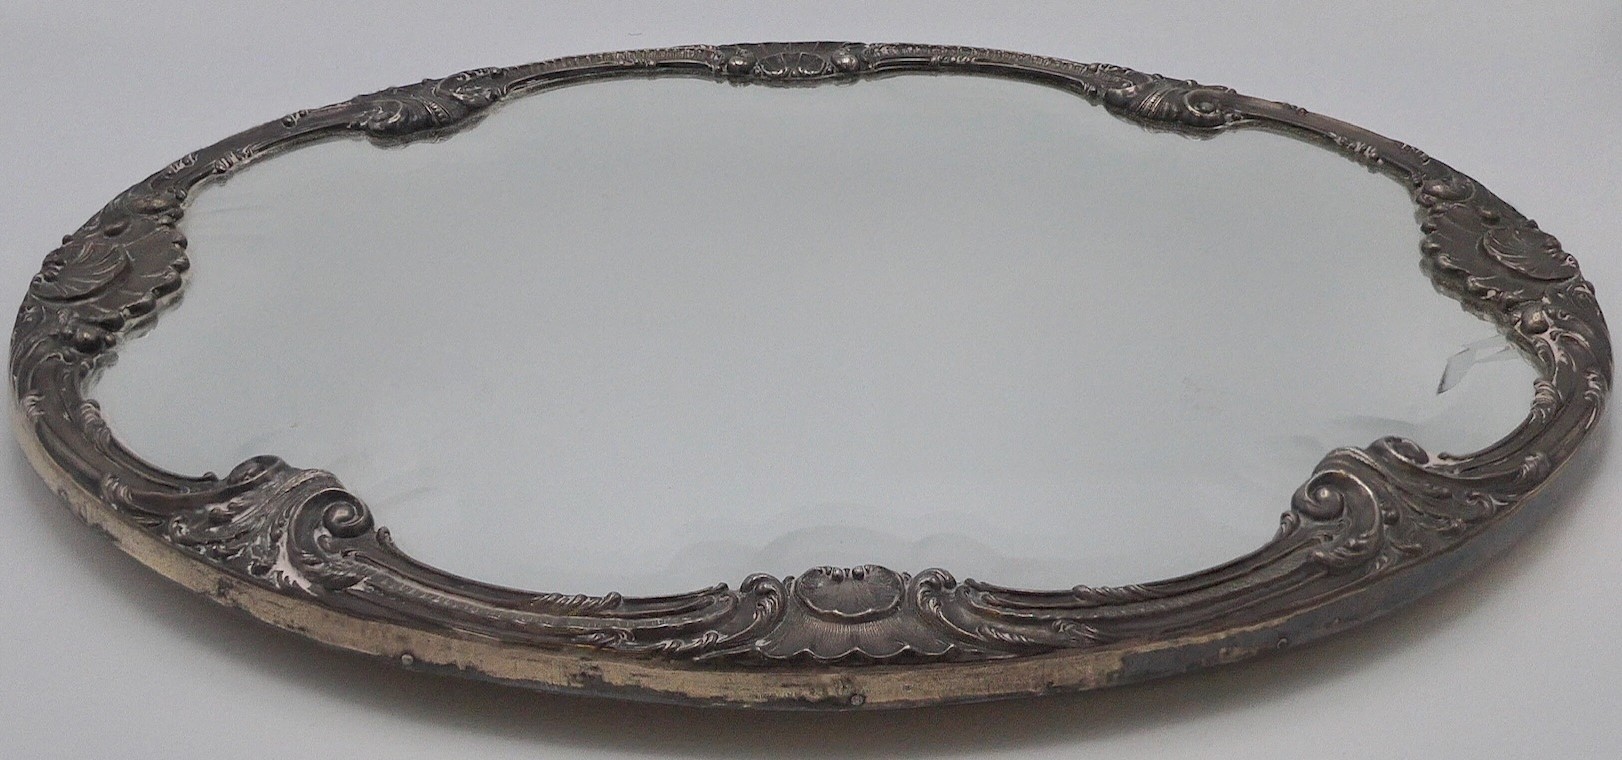 A shaped oval mirror tray with bevelled glass and mounted with a white metal frame decorated with